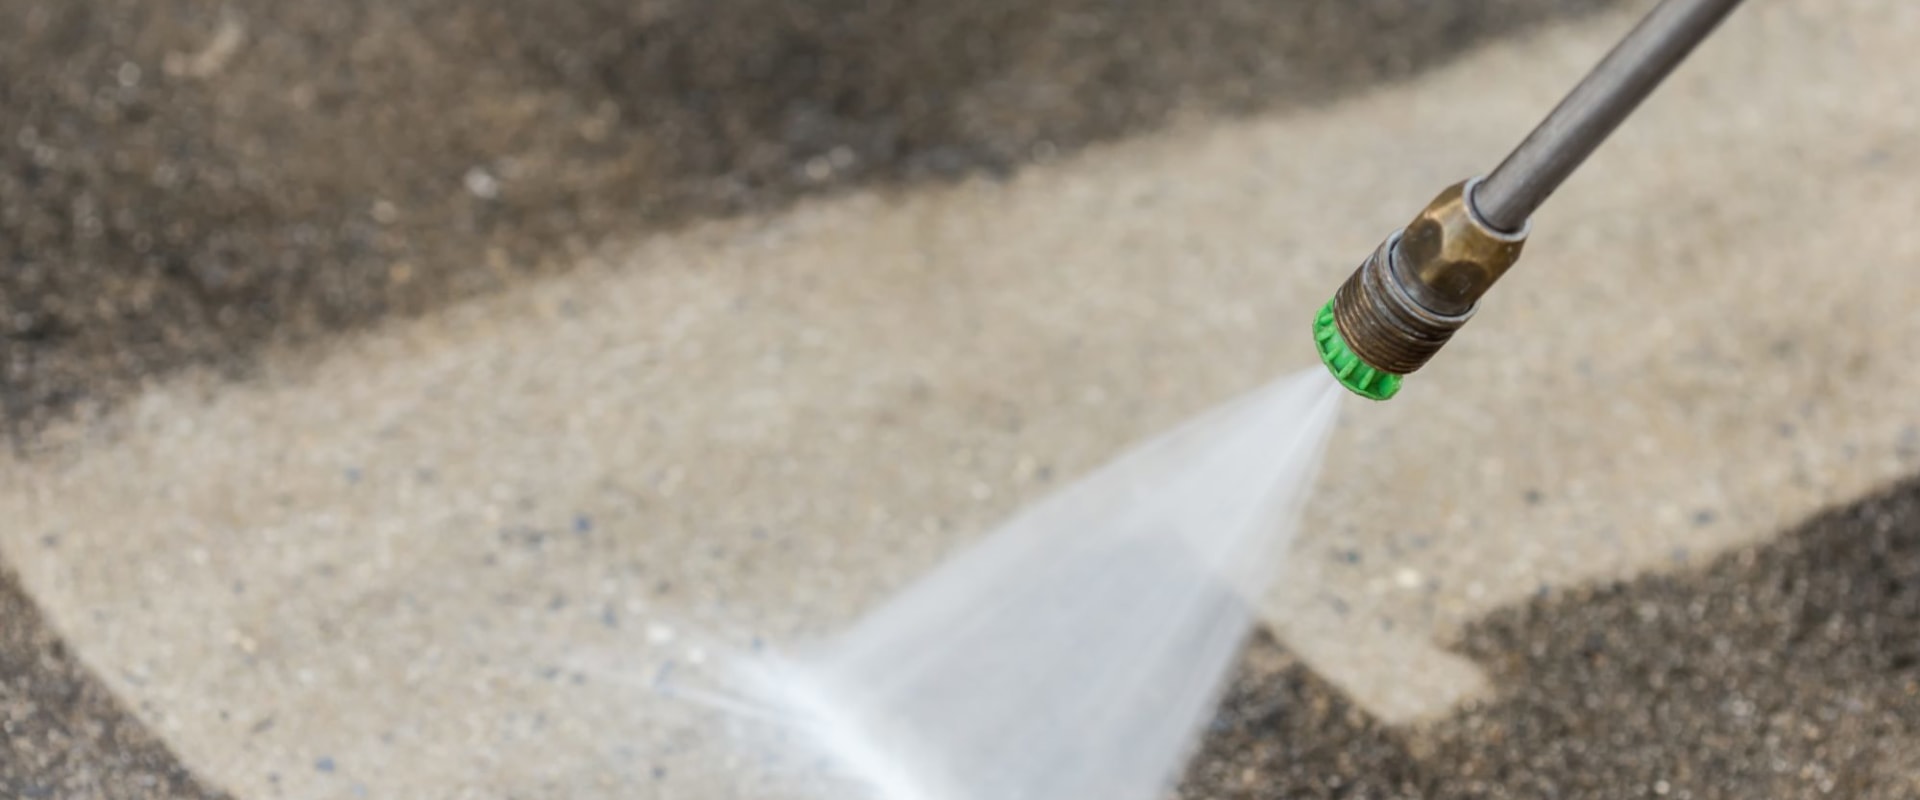 Pressure Washing: What is it and What is it Used For?